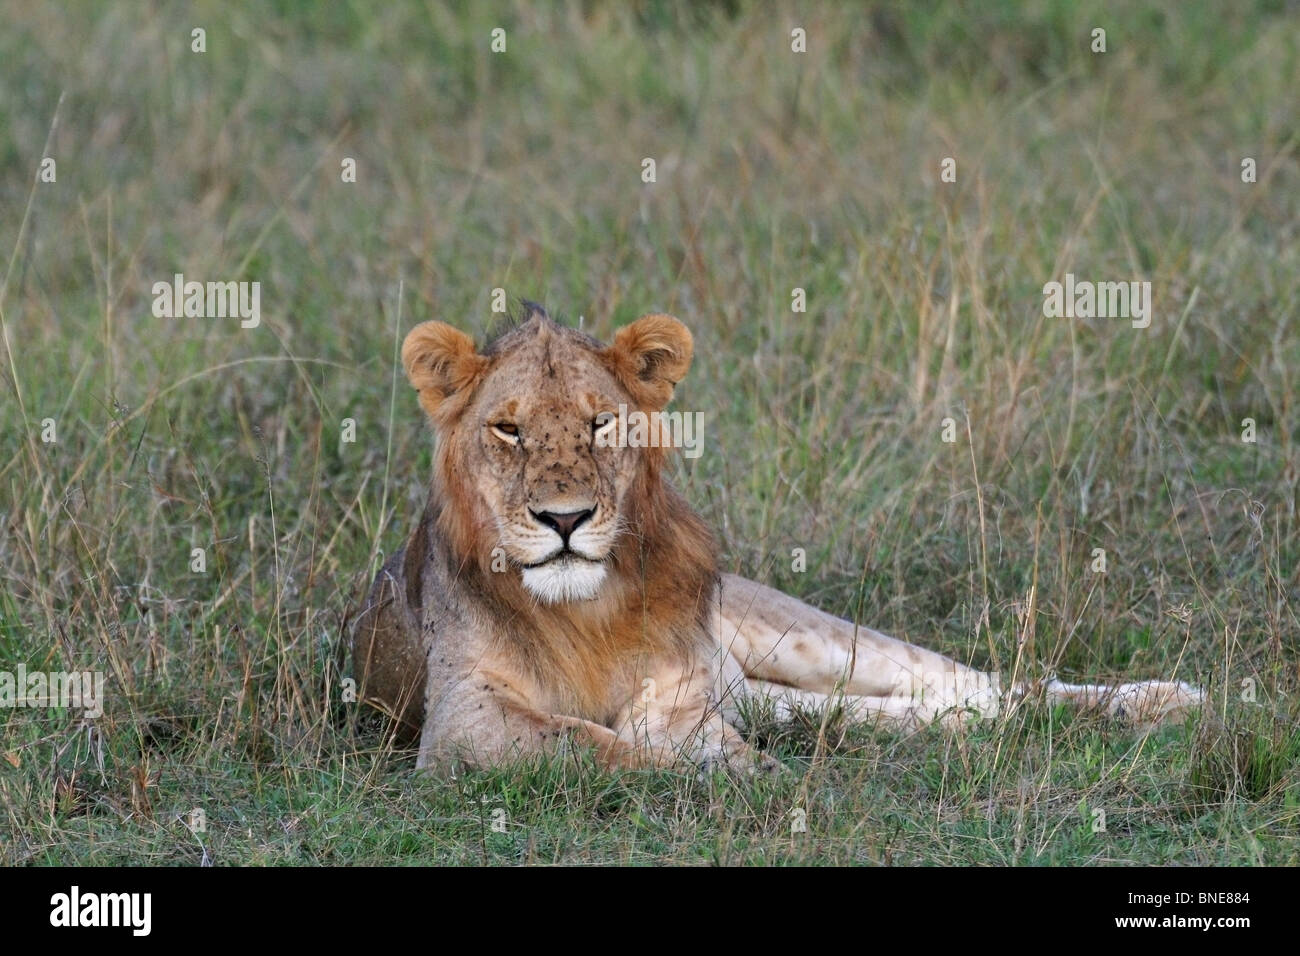 A young male Lion portrait shot. Picture taken in Masai Mara National Reserve, Kenya, East Africa. Stock Photo